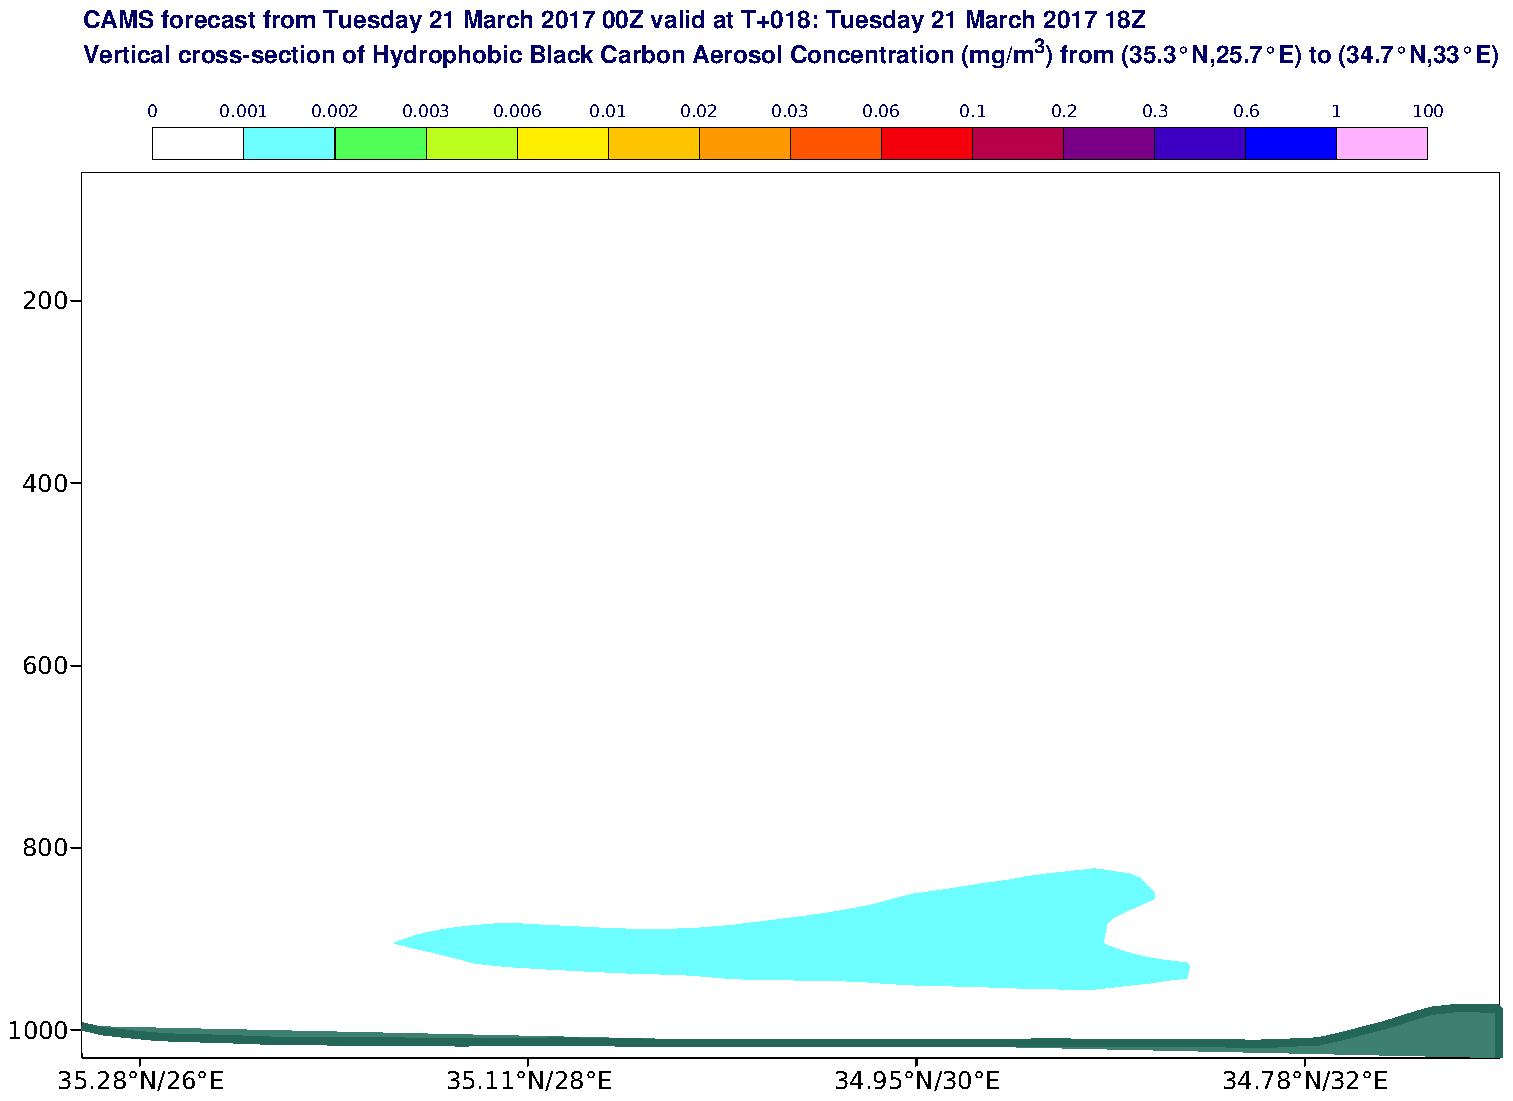 Vertical cross-section of Hydrophobic Black Carbon Aerosol Concentration (mg/m3) valid at T18 - 2017-03-21 18:00